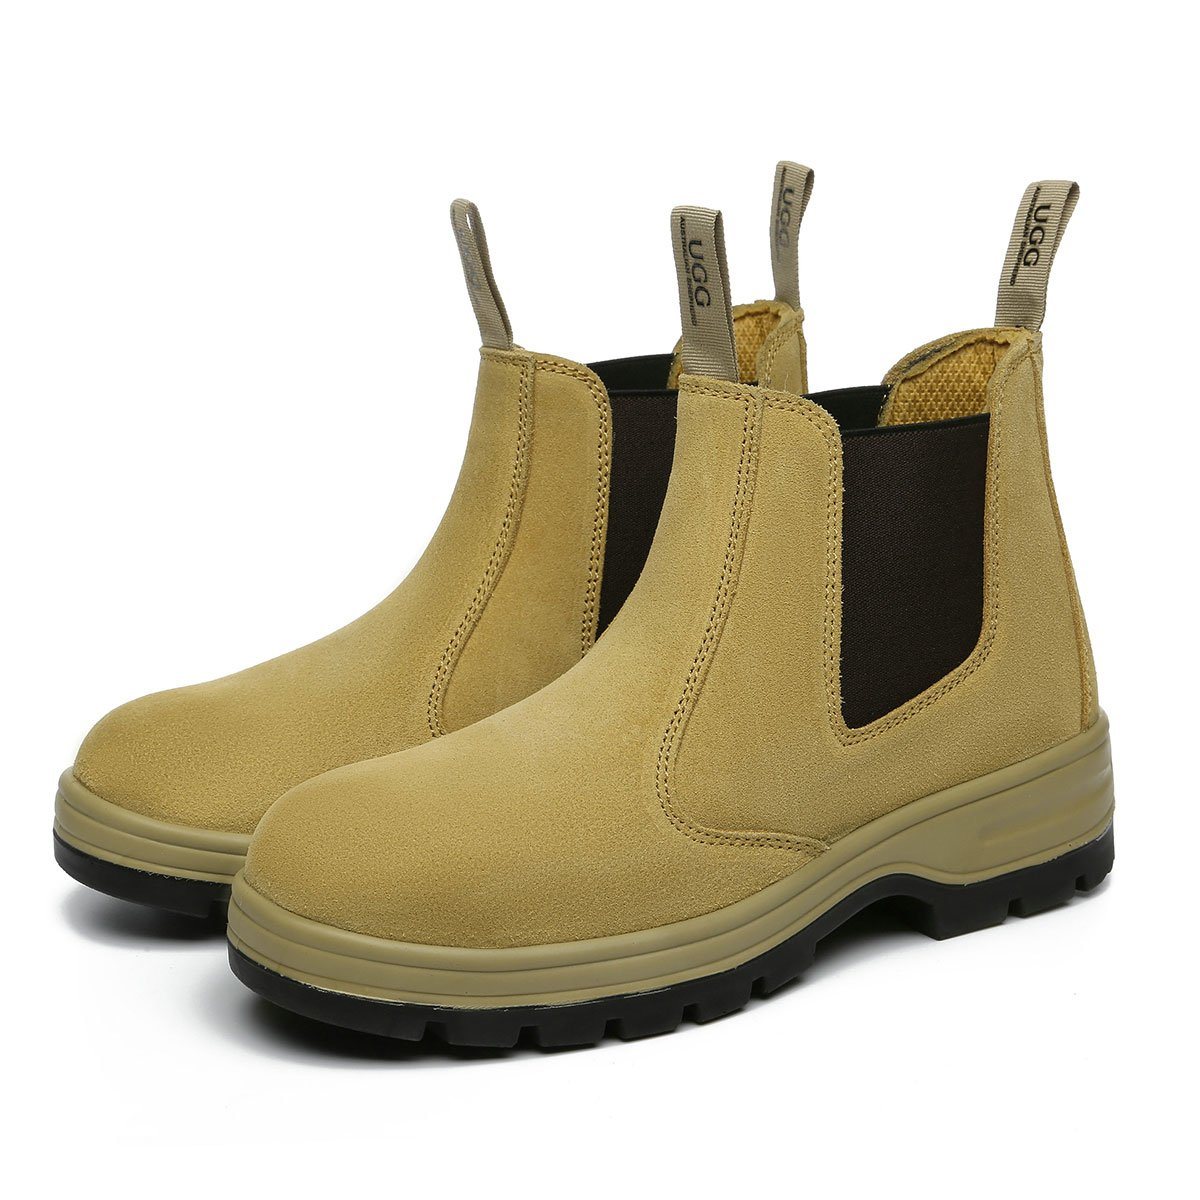 UGG Steel Toe Cap Pull On Safety Boots